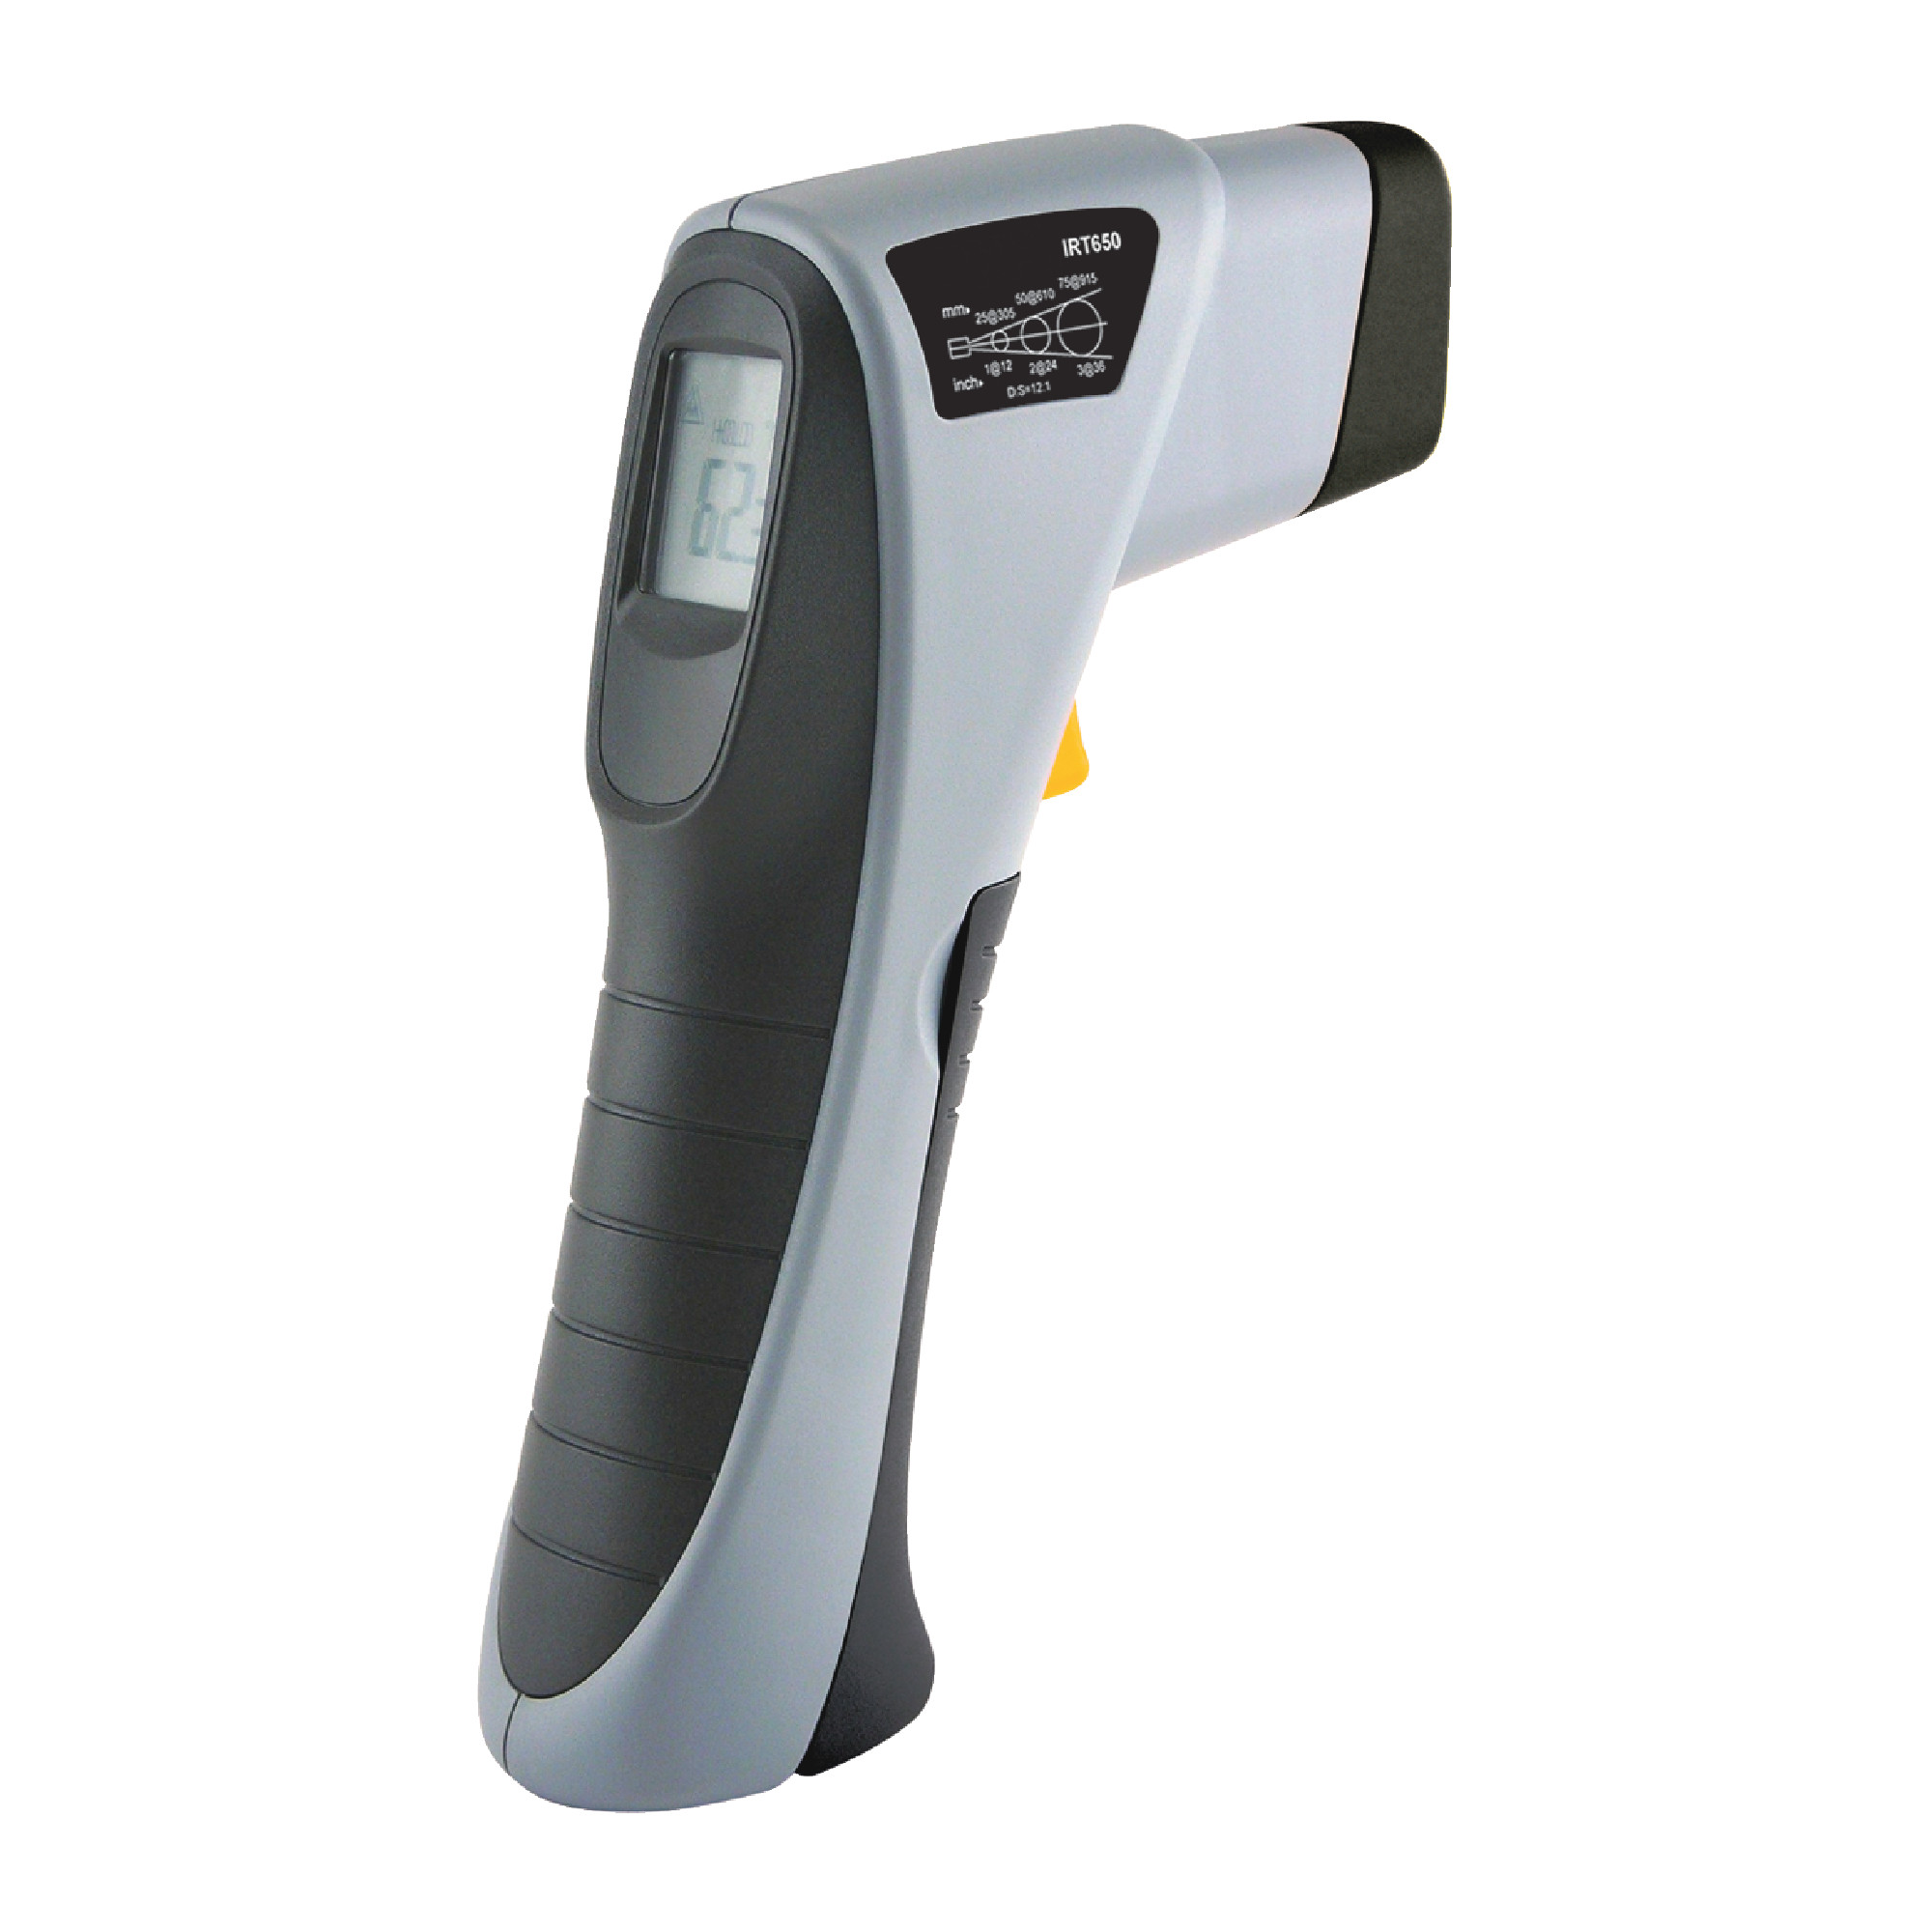 Gun-Style Infrared Thermometers With Laser